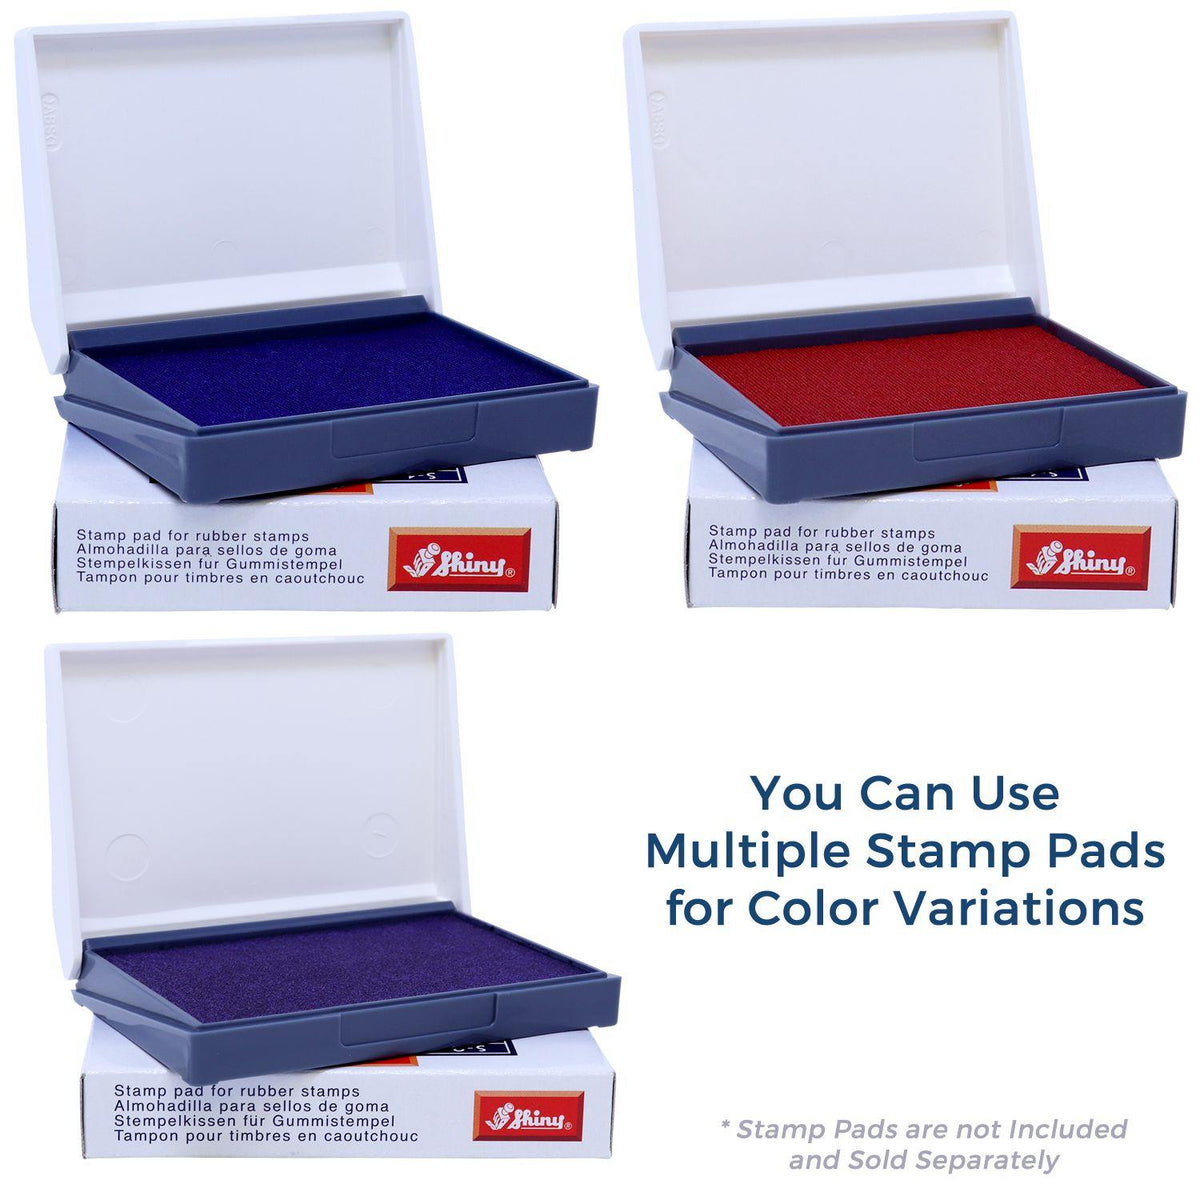 Stamp Pads for Joint Exhibit Rubber Stamp Available